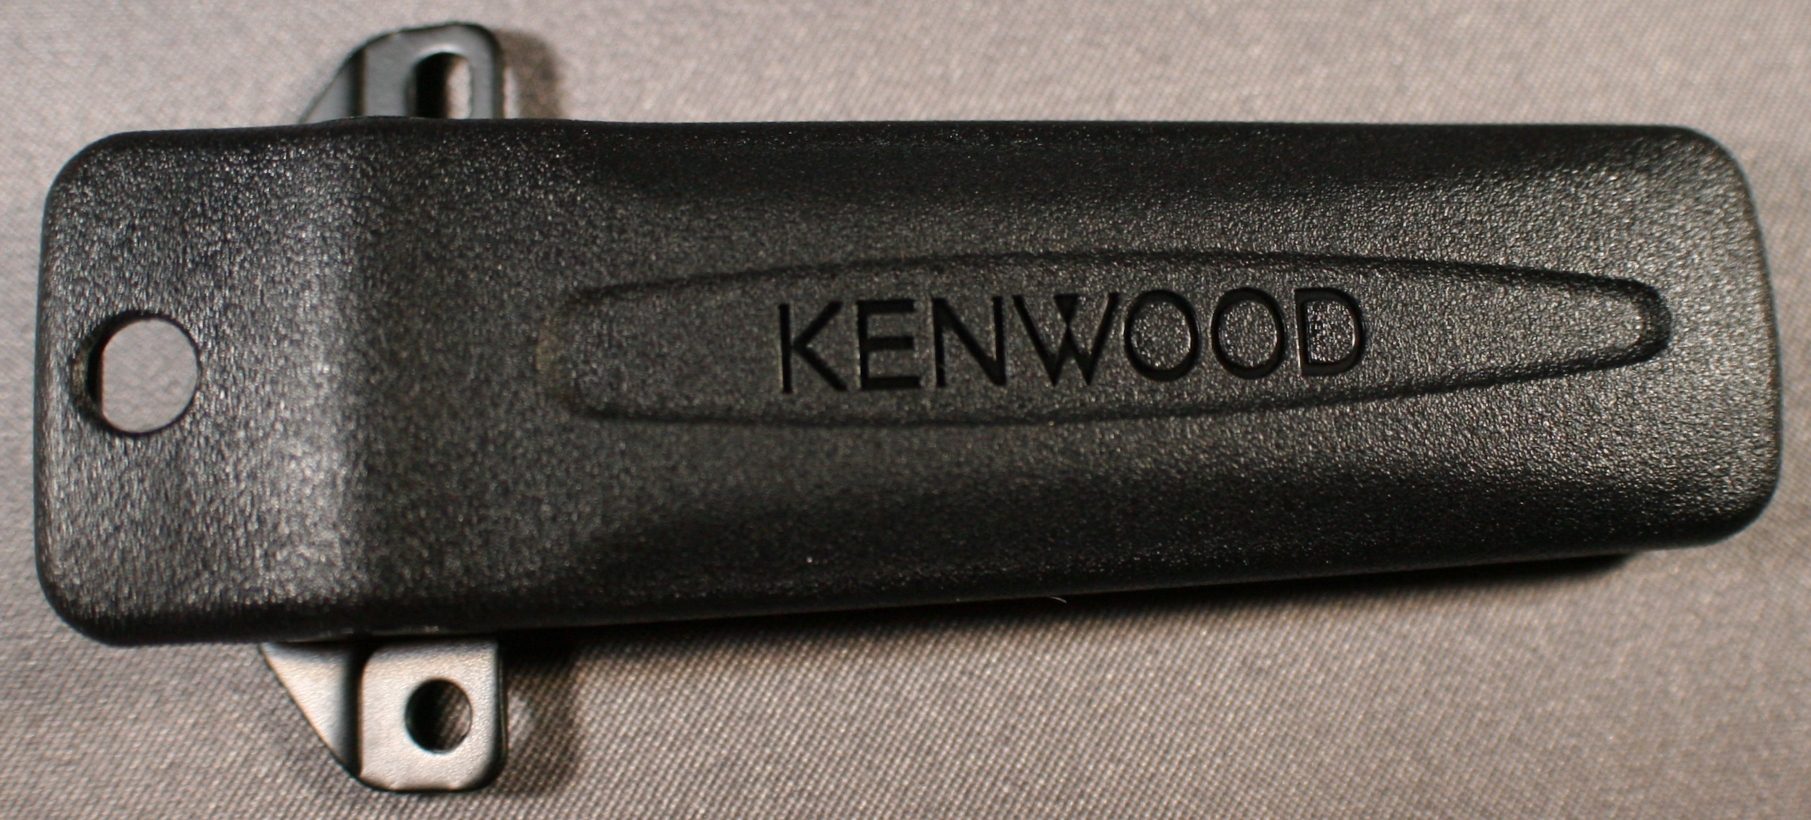 Kenwood ProTalk KBH-10 replacement belt clips TK2300VP Spring Action clip  for TK series radios. Free Shipping!